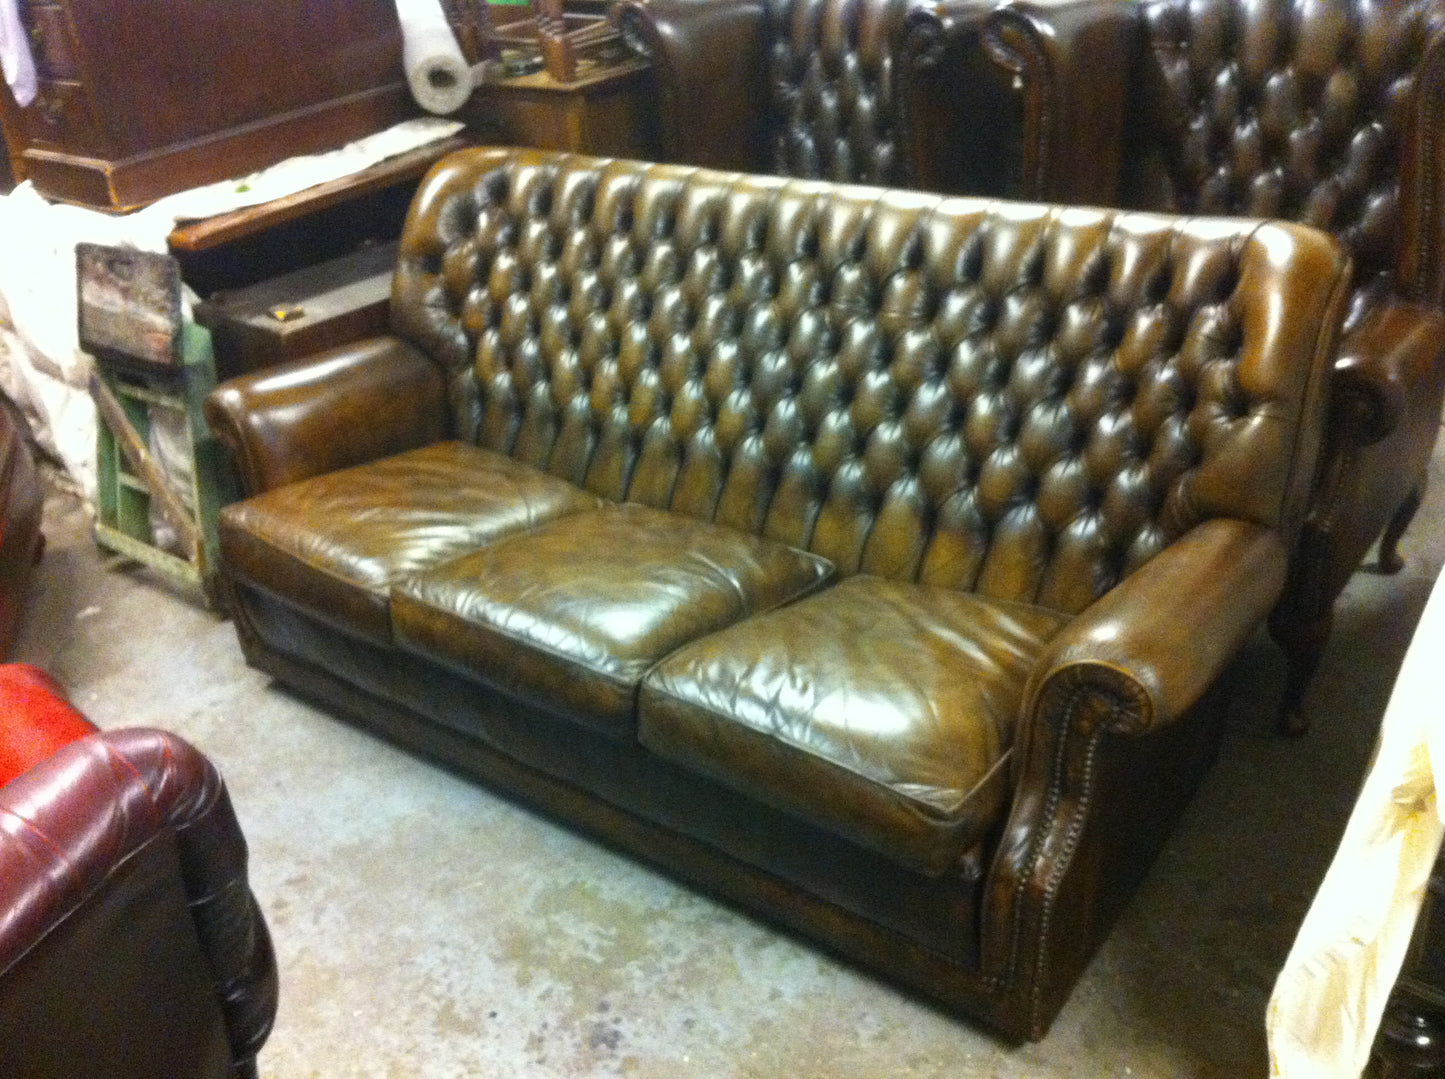 Gorgeous Hand Dyed "Antique" Brown Vintage Leather Chesterfield High Back Sofa